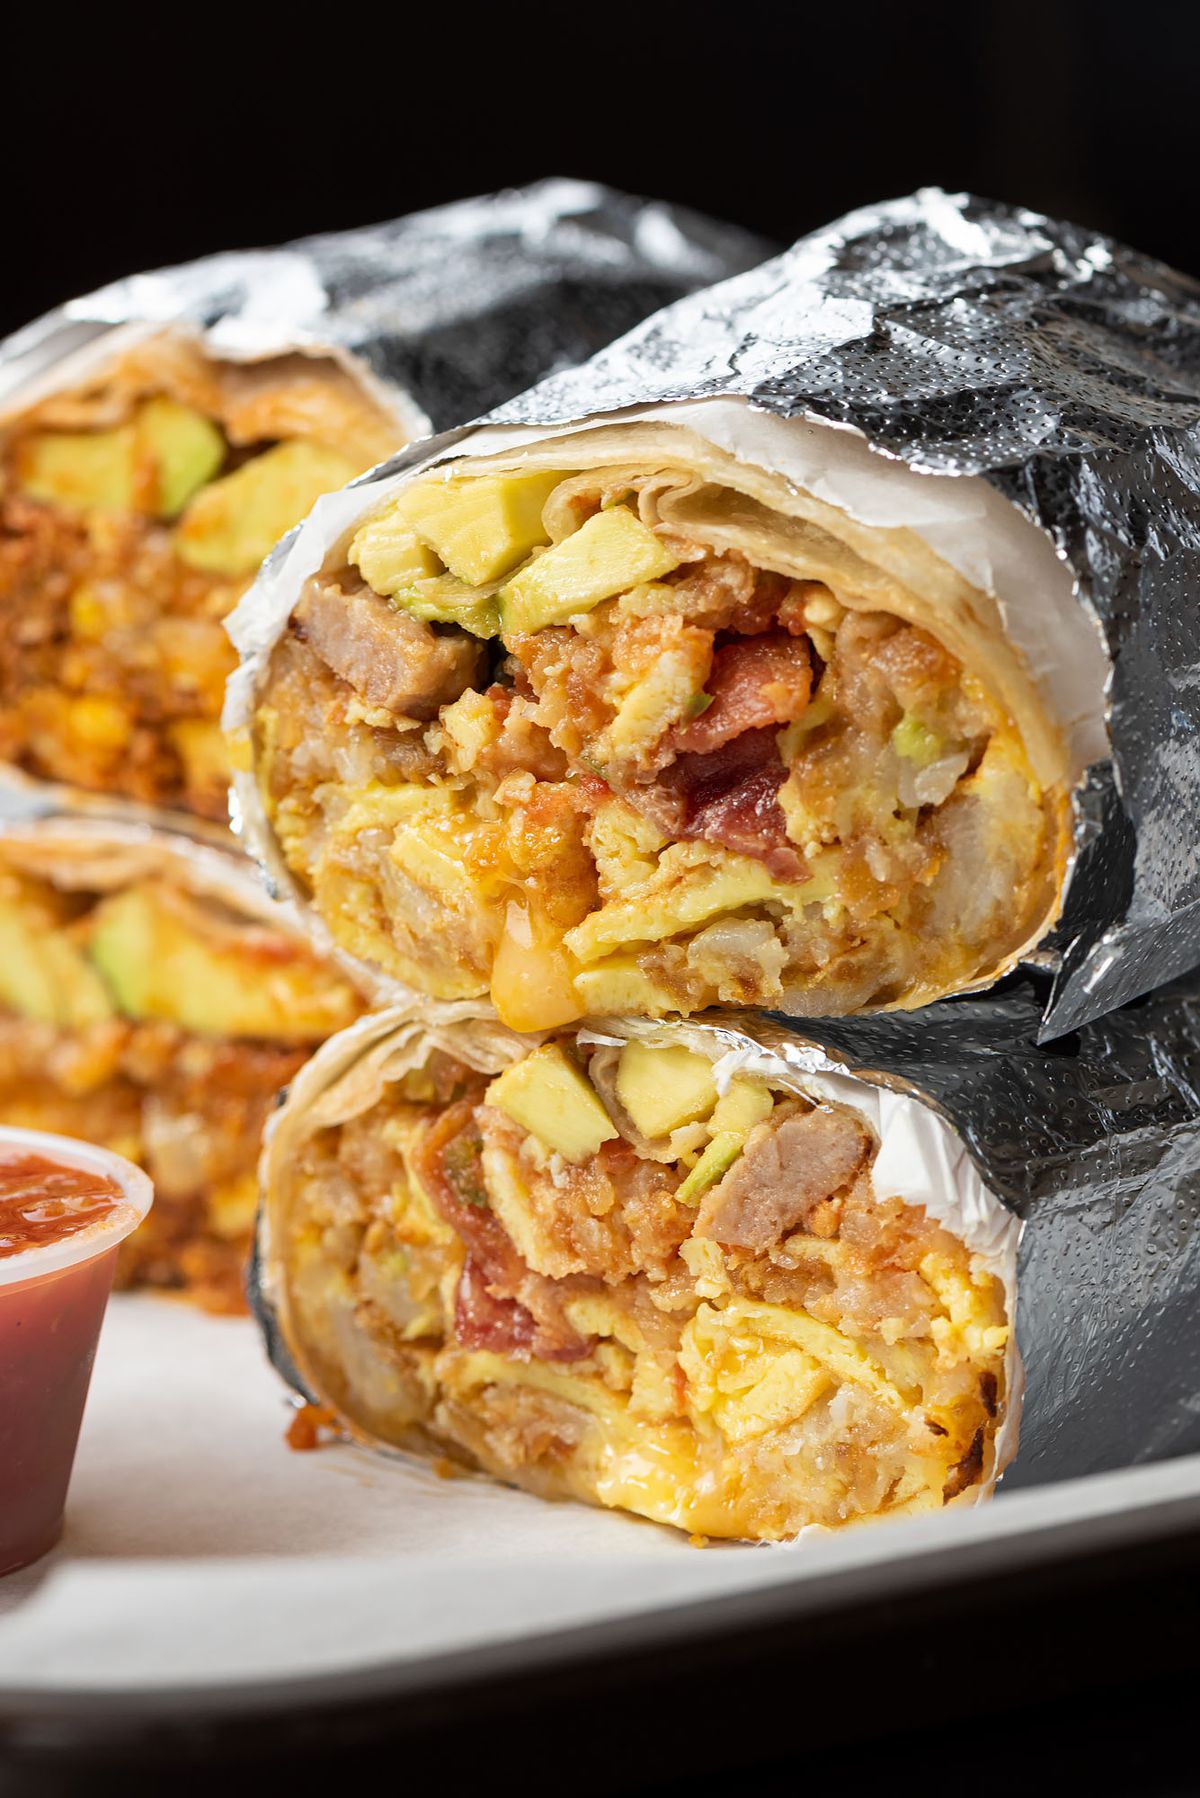 Stacks of breakfast burritos dripping with cheese.